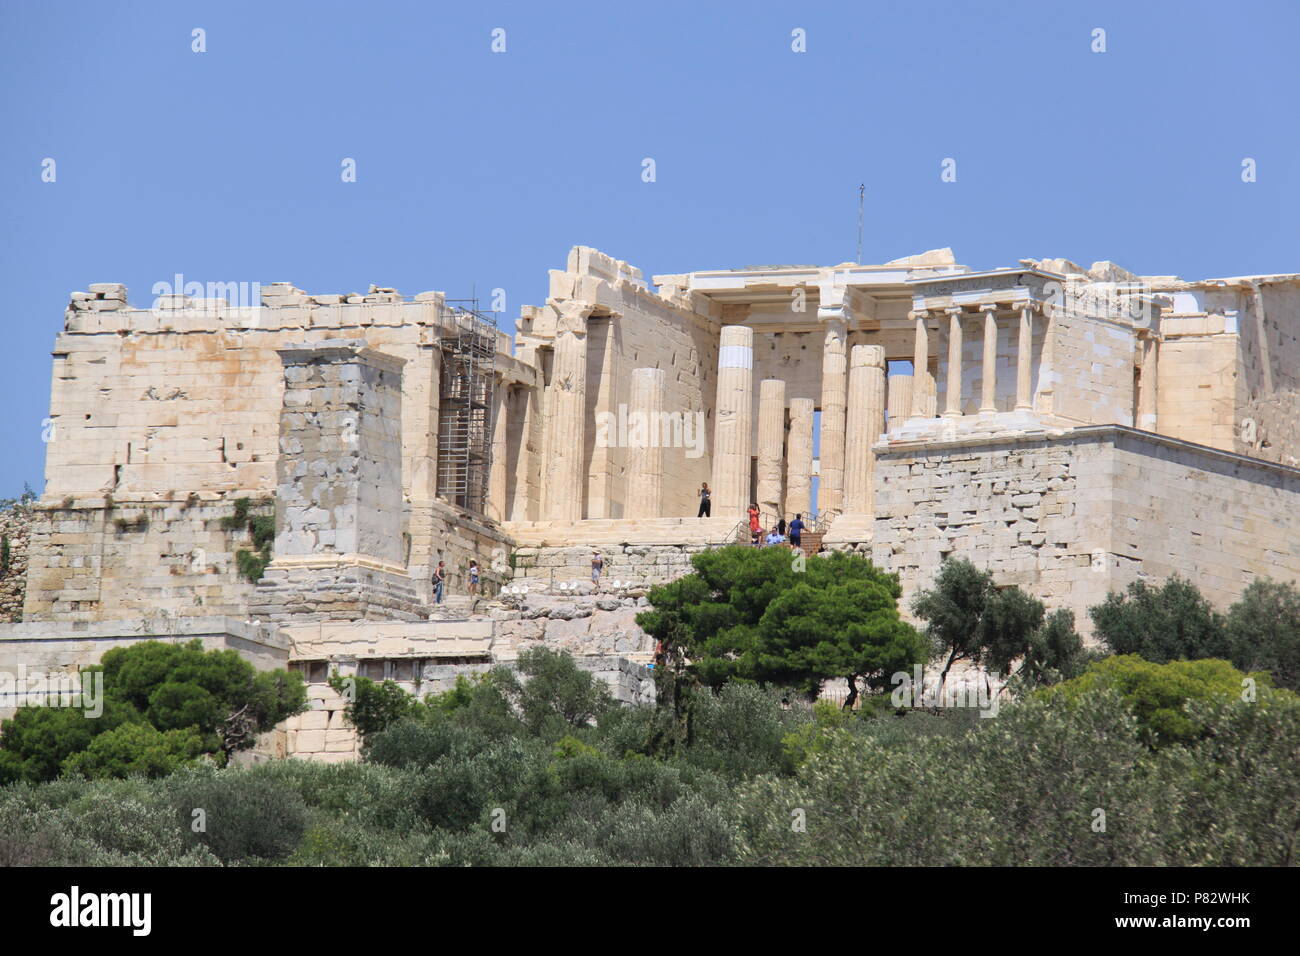 View towards the Acropolis (an ancient citadel located on a rocky outcrop) above the city of Athens, GREECE, PETER GRANT Stock Photo